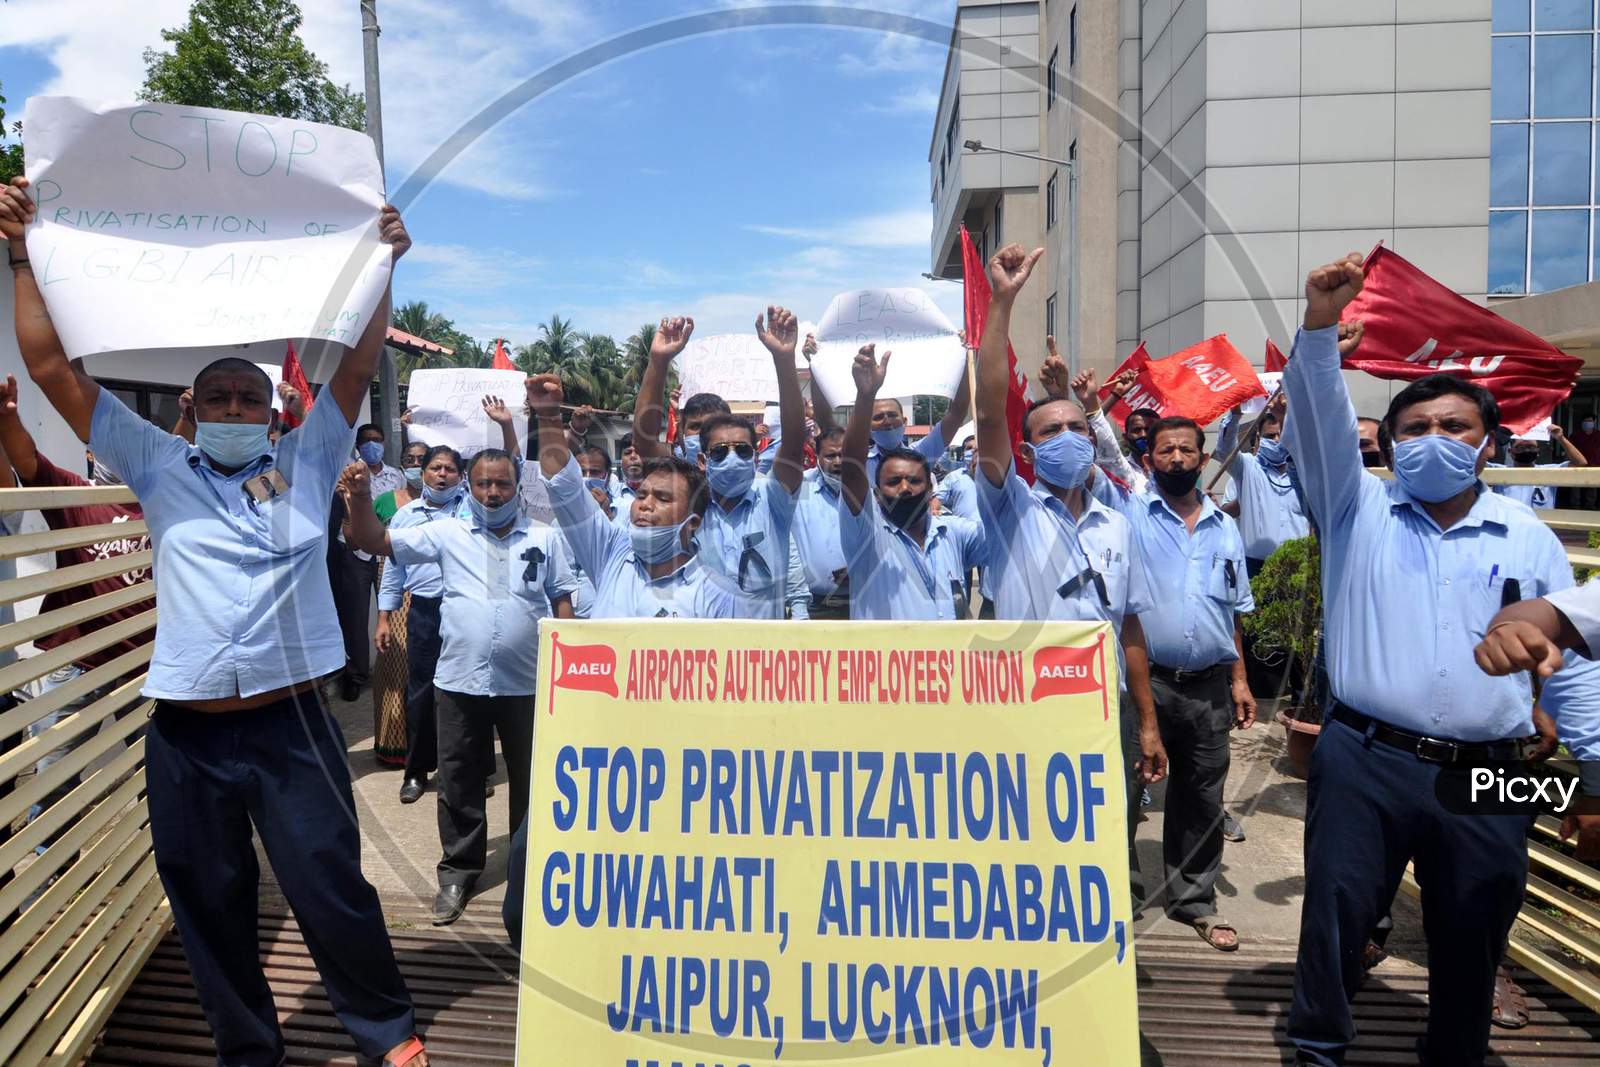 Members of Airports Authority Employees' Union (AAEU) stage a protest over Centre's approval to lease three airports, Jaipur, Guwahati and Thiruvananthapuram, under the public-private partnership (PPP) model, outside LGBI Airport in Guwahati, Monday, Aug. 24, 2020.